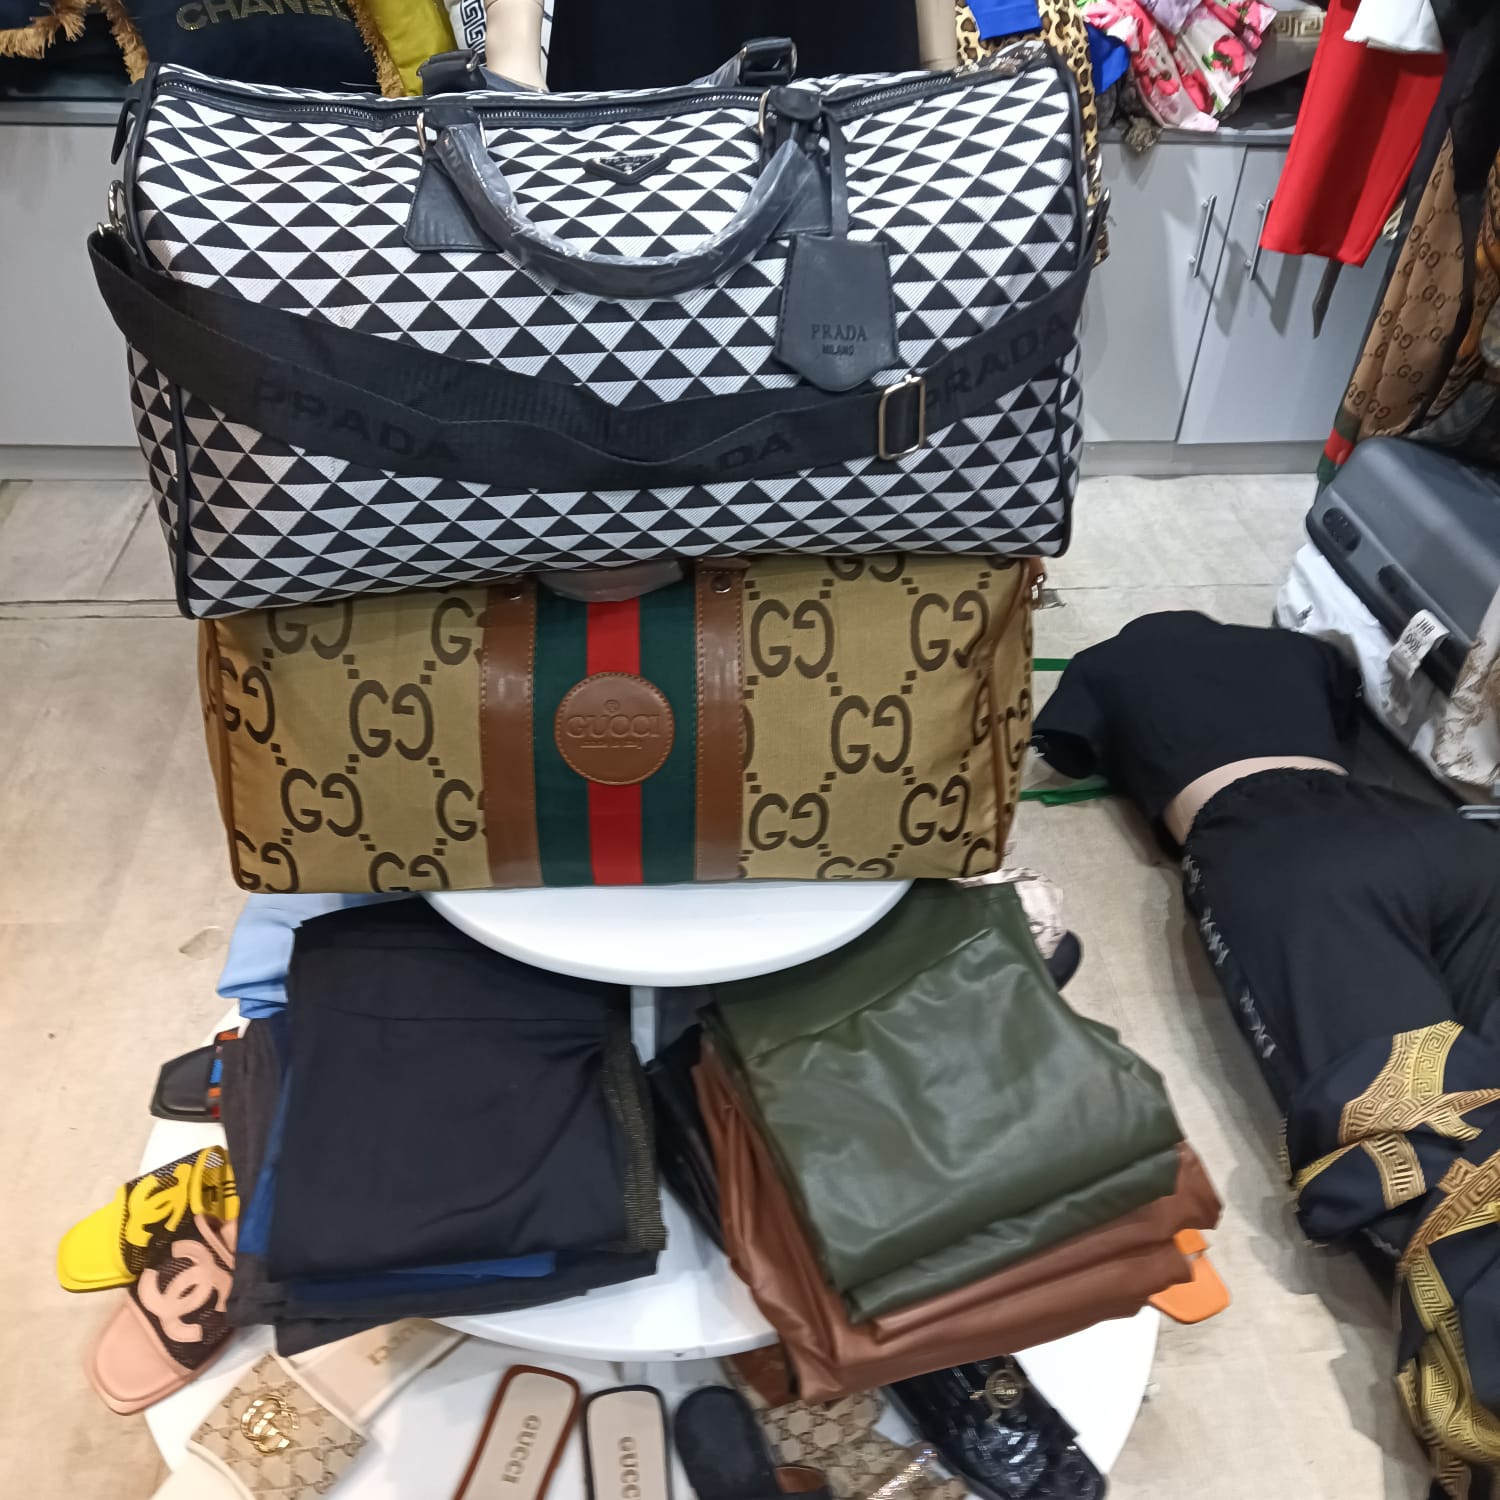 Police seize counterfeit goods worth millions and arrest two suspects